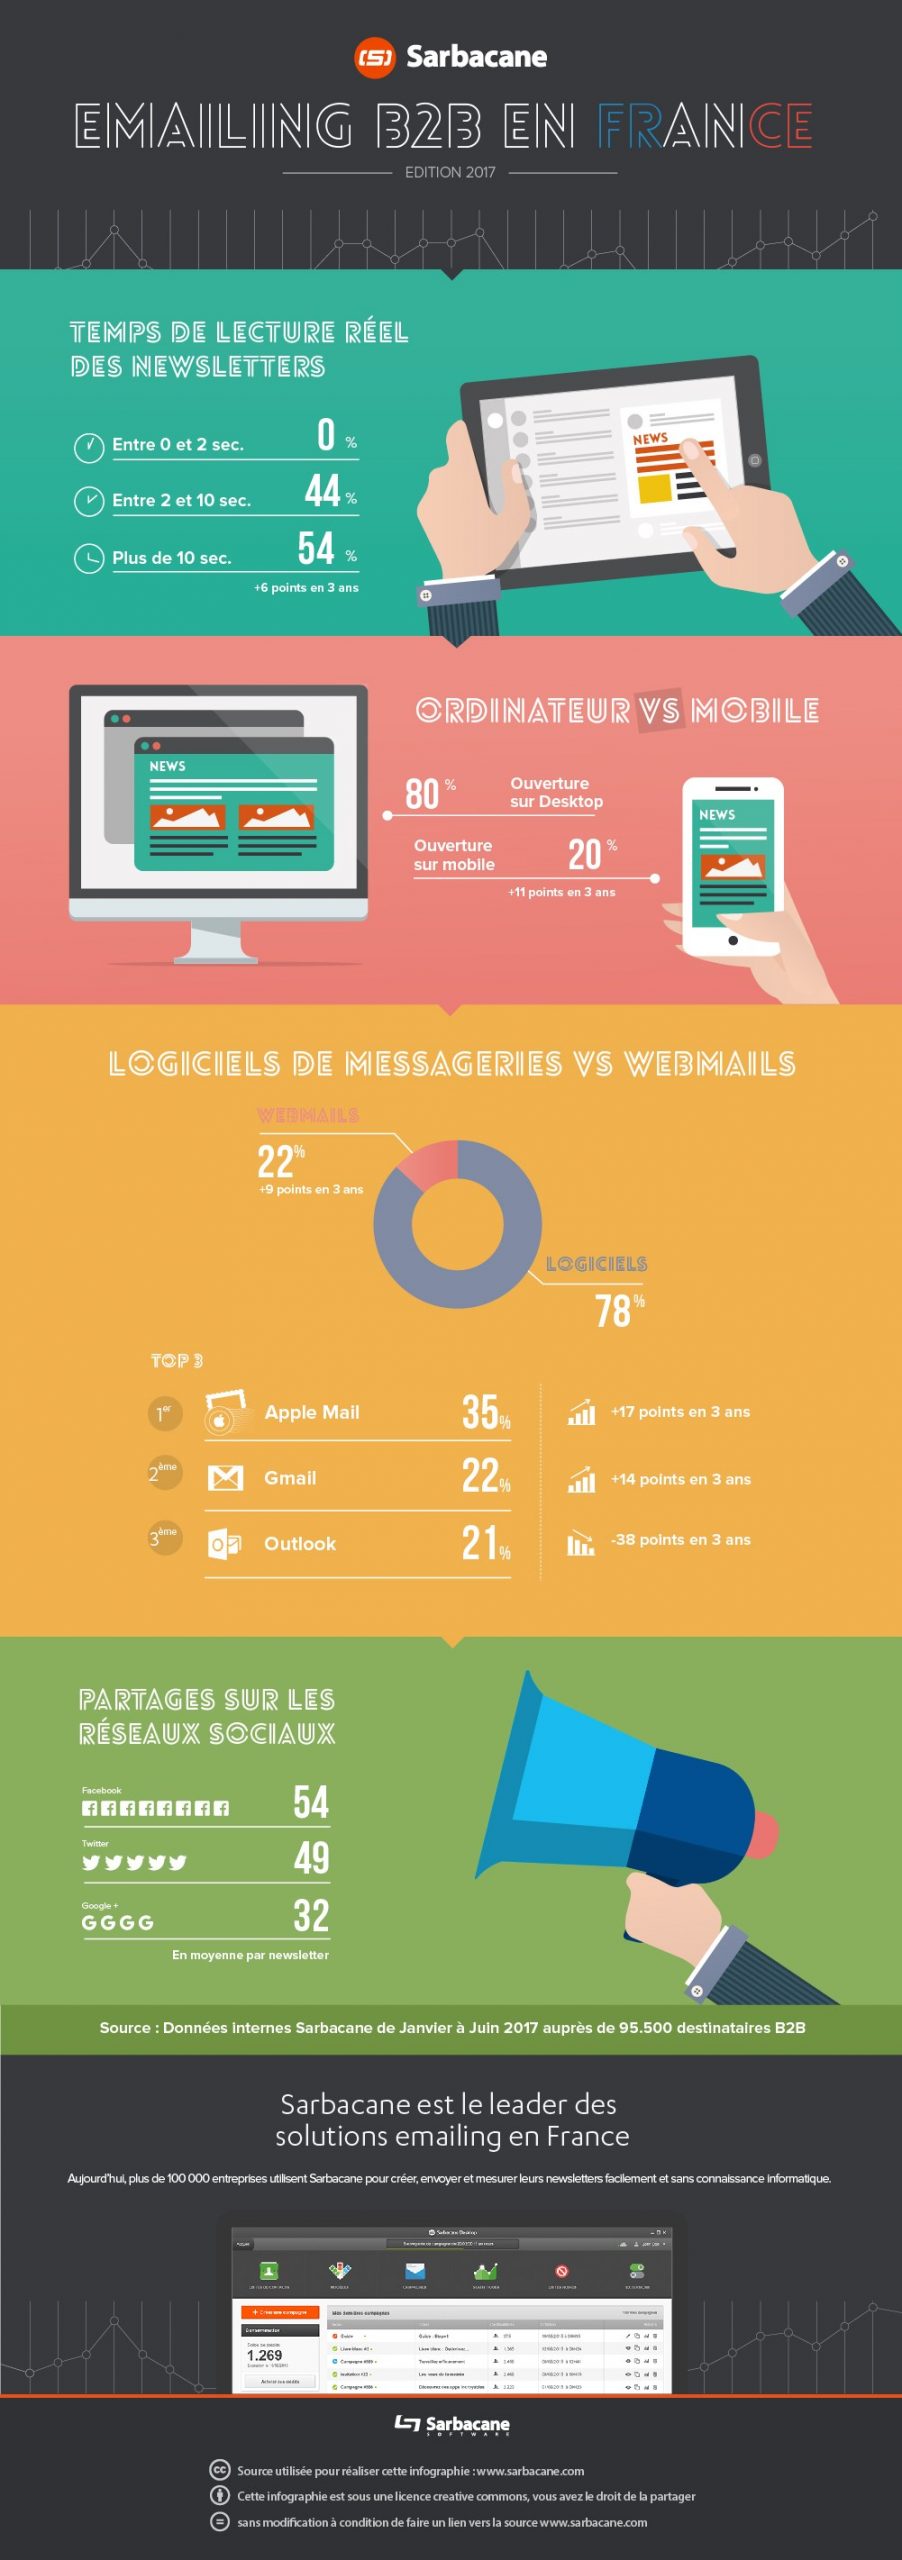 Infographie emailing B2B 2017